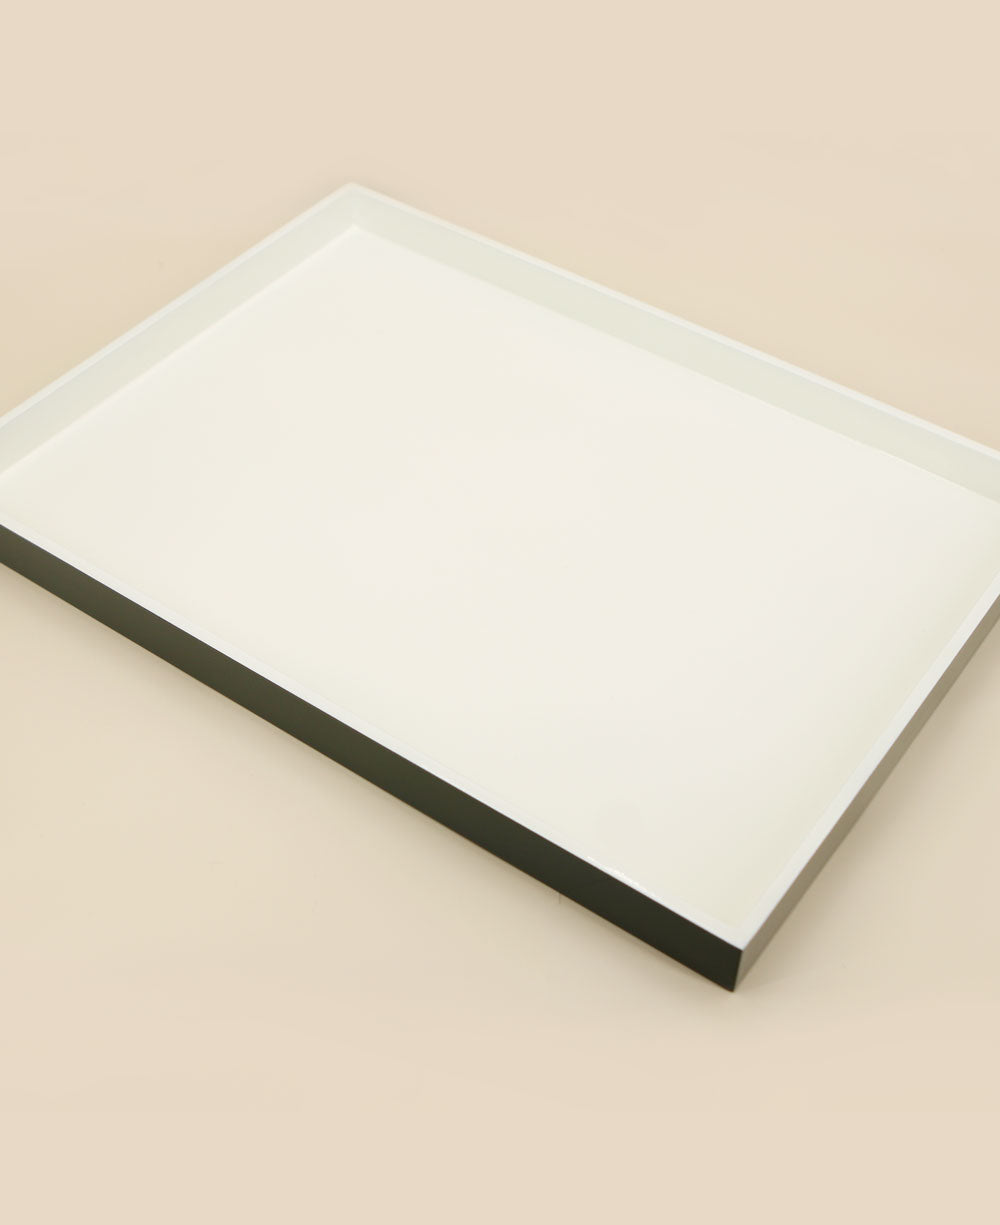 Contemporary White And Grey Minimalist Lacquer Tray, Vietnam – Cultural ...